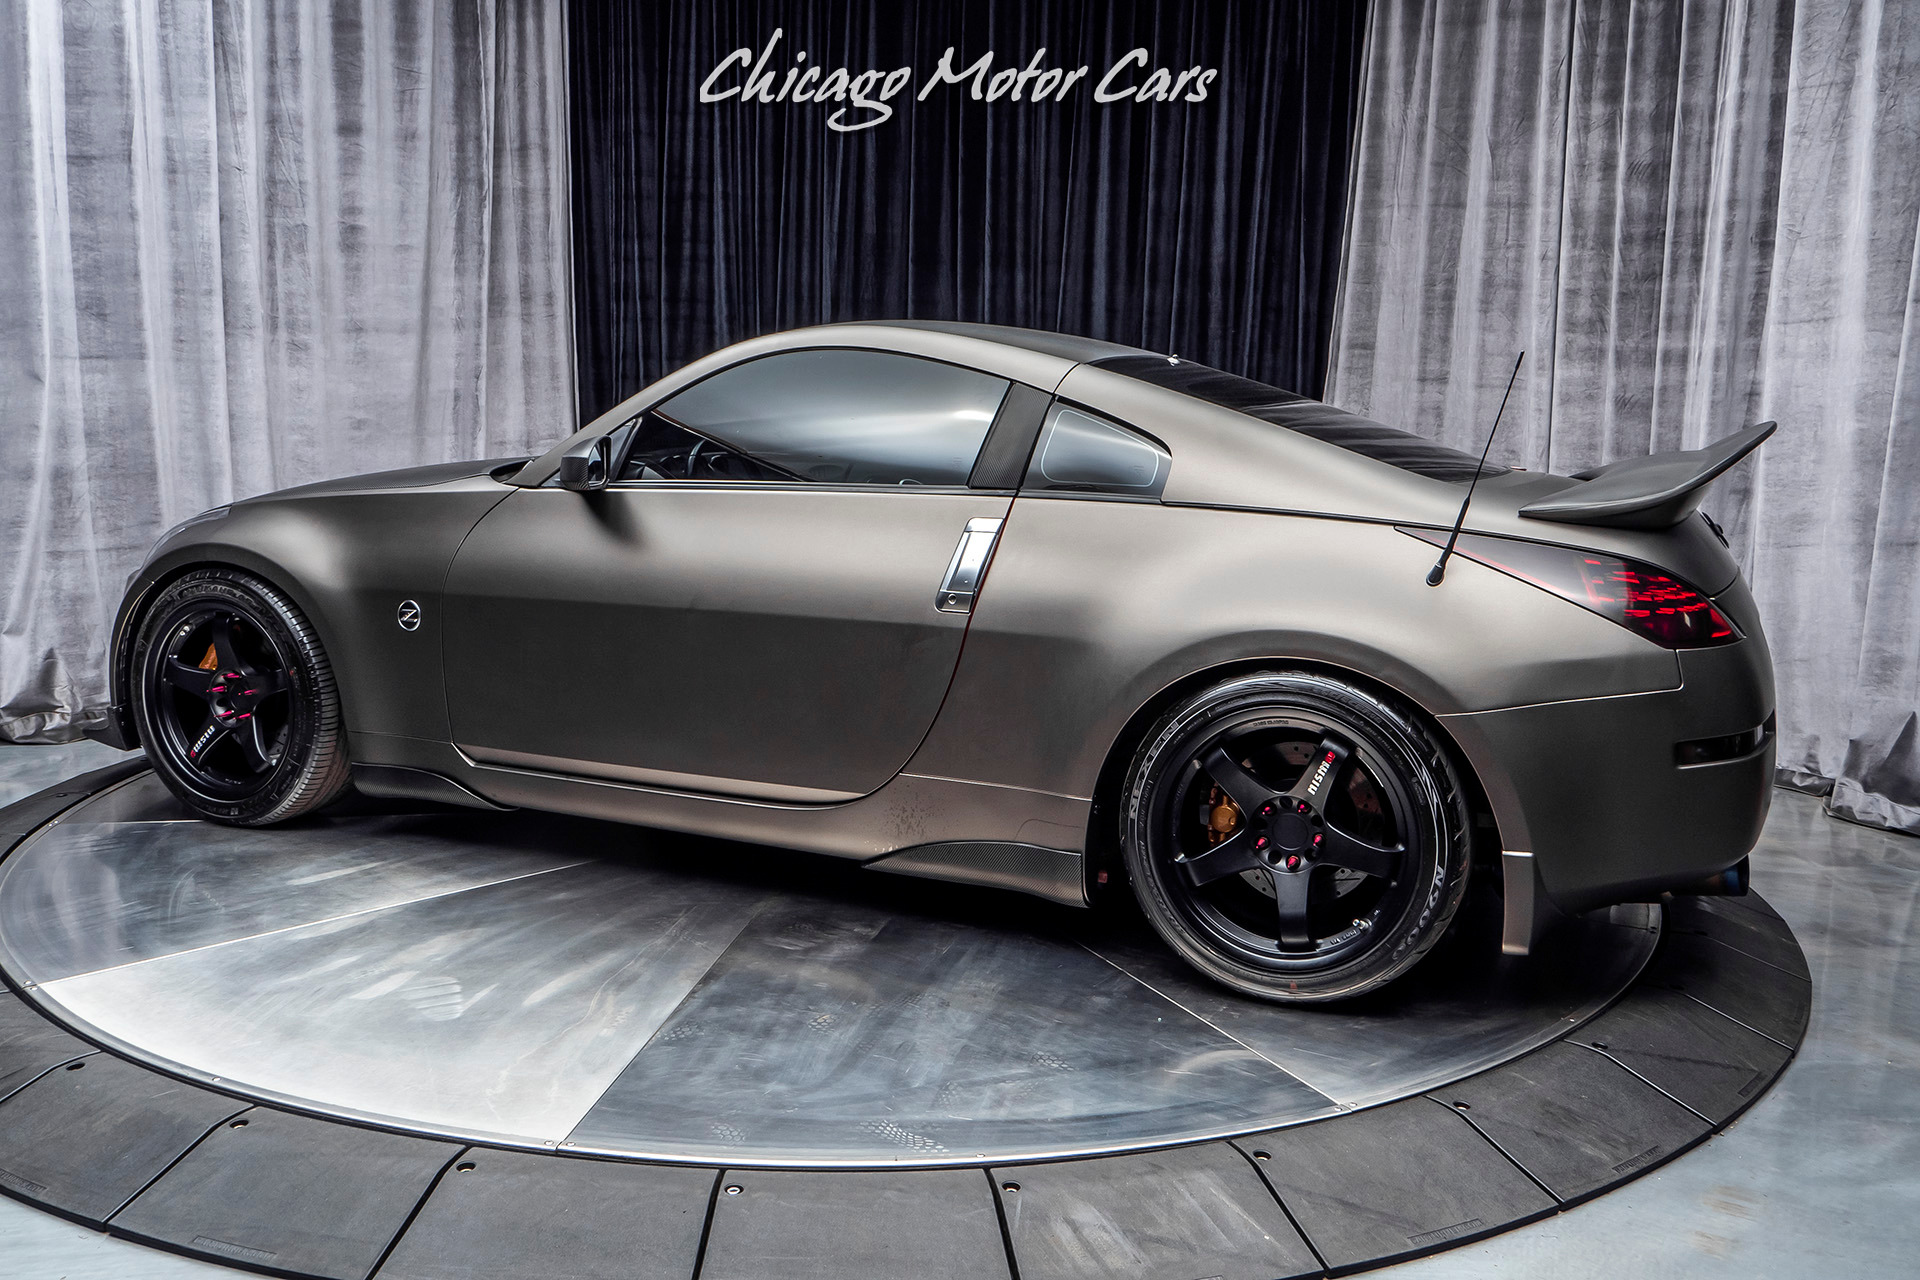 Used 2006 Nissan 350Z Track Coupe LOADED WITH UPGRADES! For Sale ($13,800)  | Chicago Motor Cars Stock #6M306590